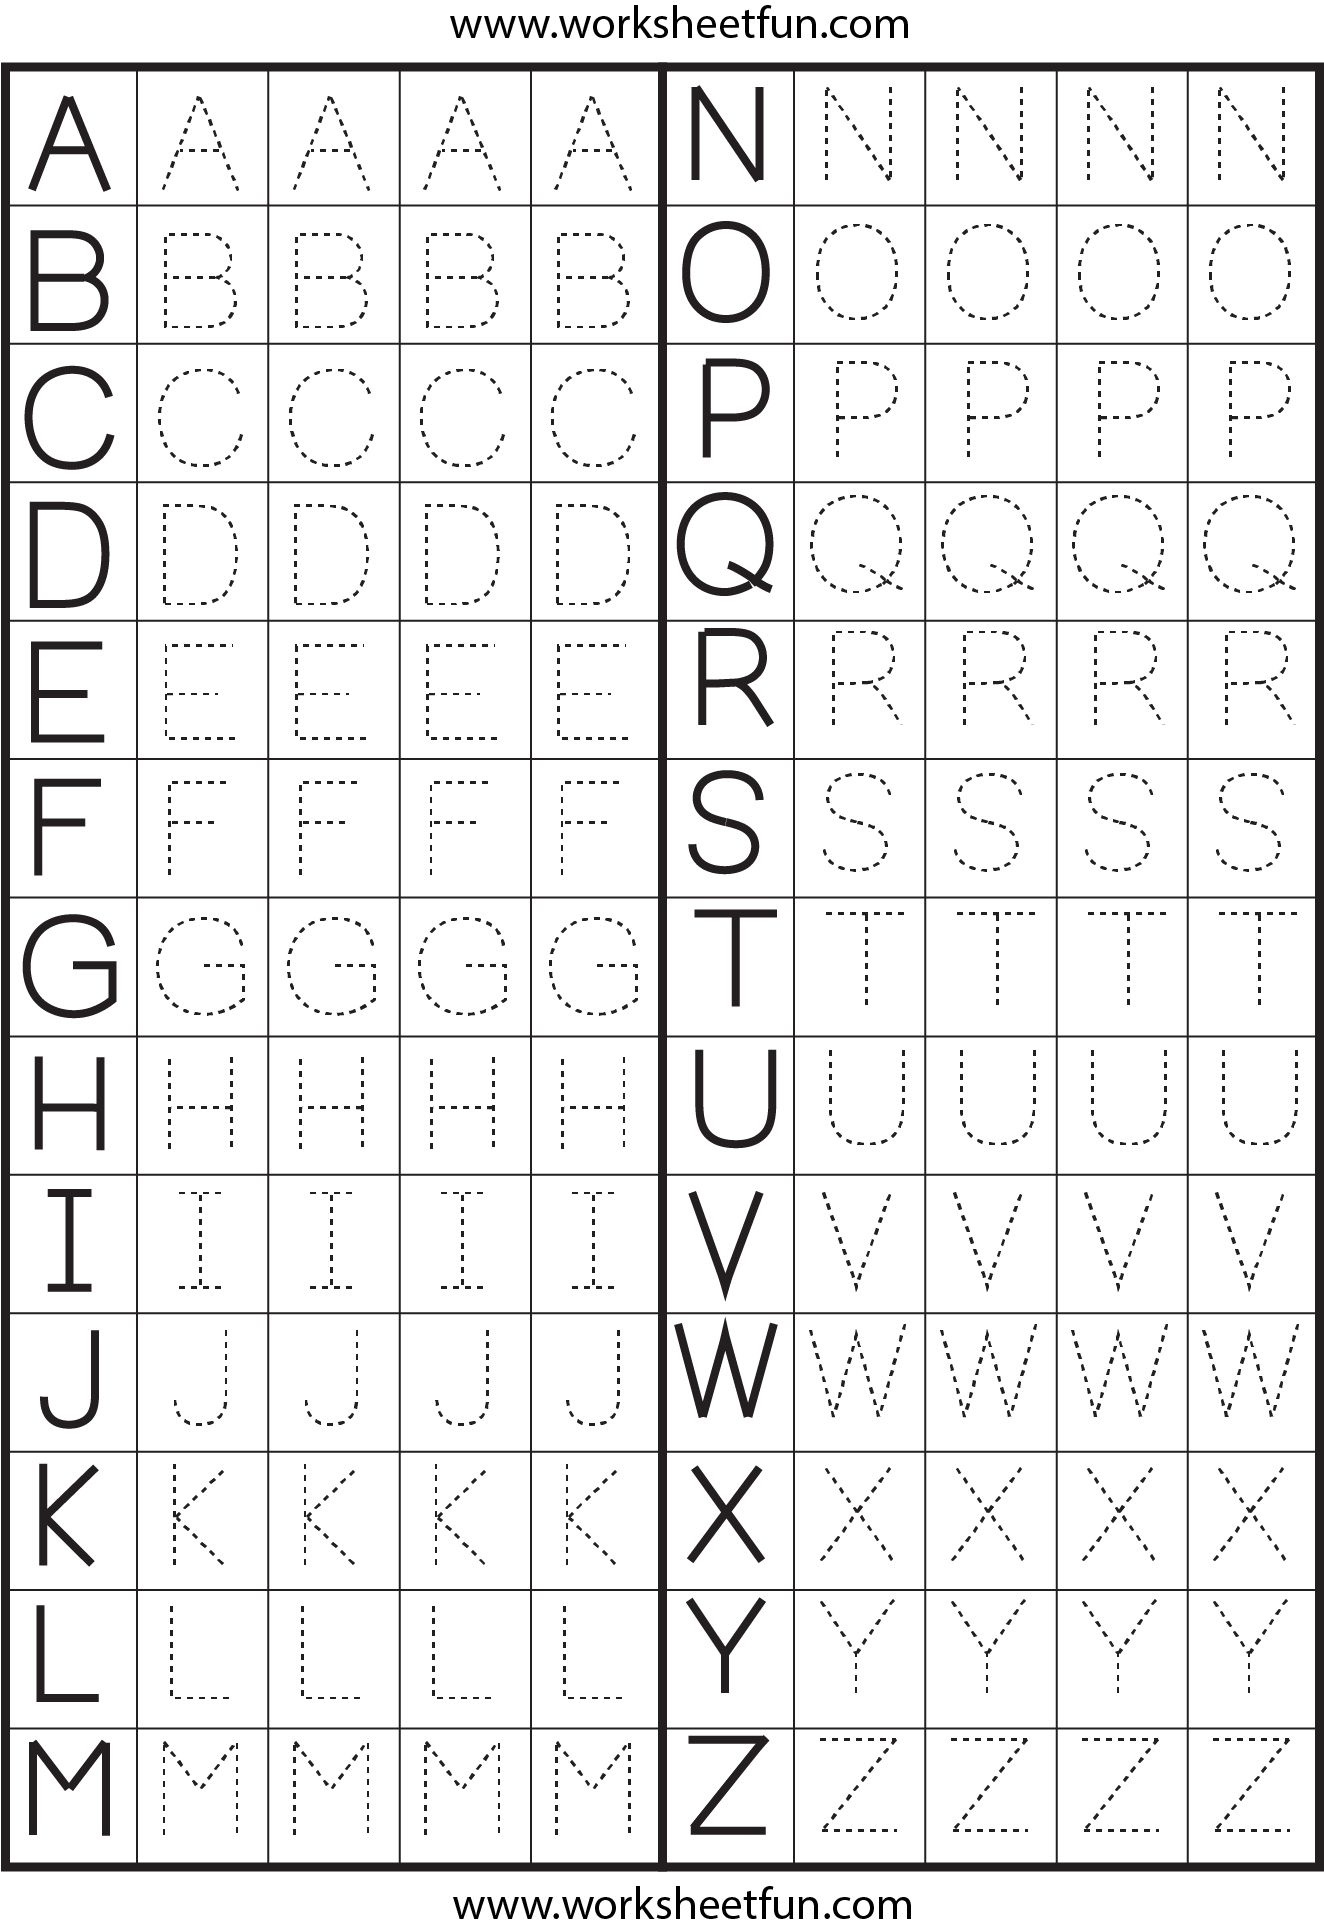 Abc Worksheets For Preschool To Free Download. Abc throughout Alphabet Tracing Download